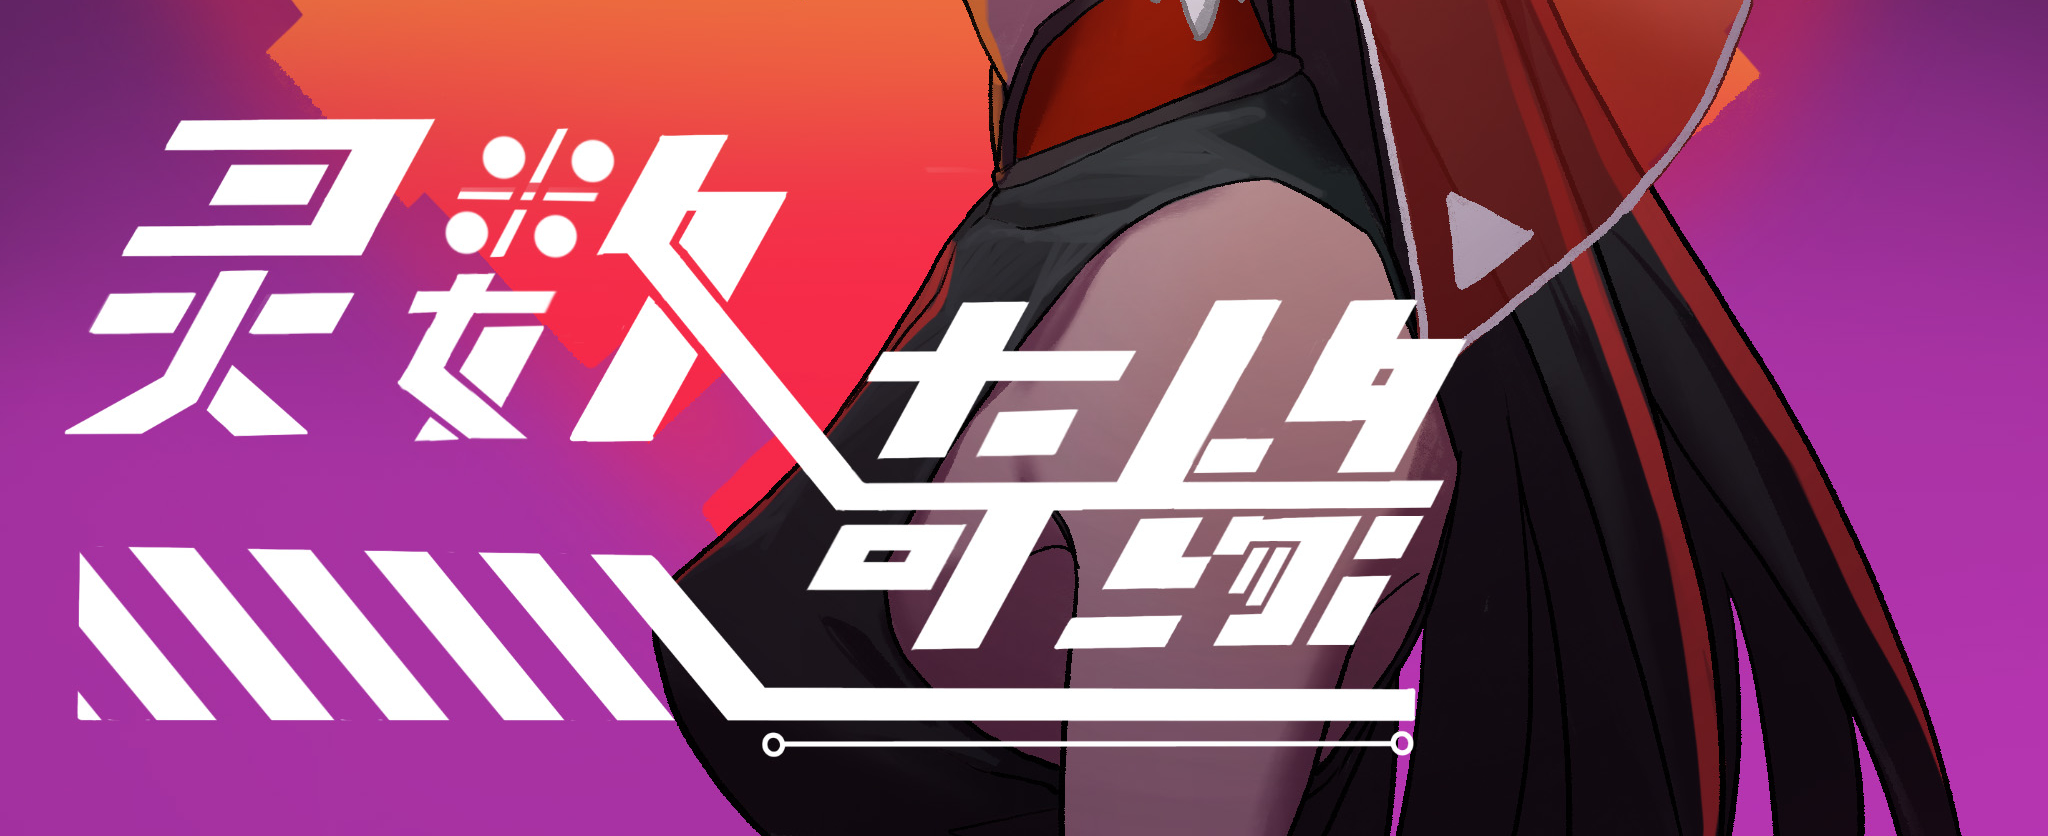 The open source independent game project "Lingshu Romance" being developed by the community